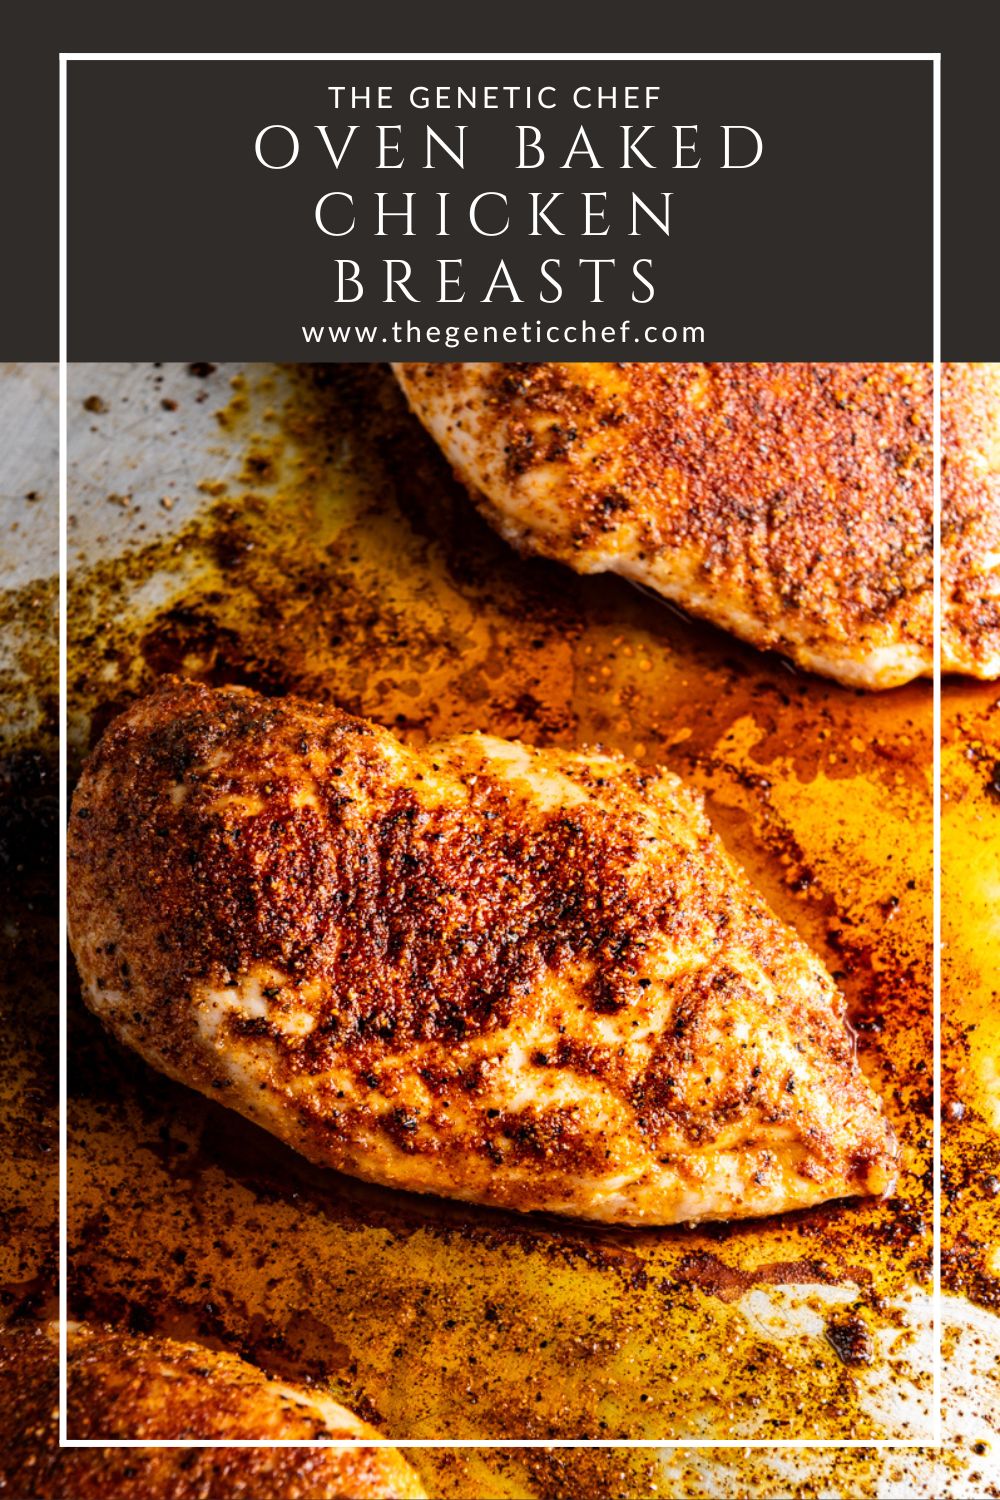 OVEN BAKED CHICKEN BREASTS - The Genetic Chef